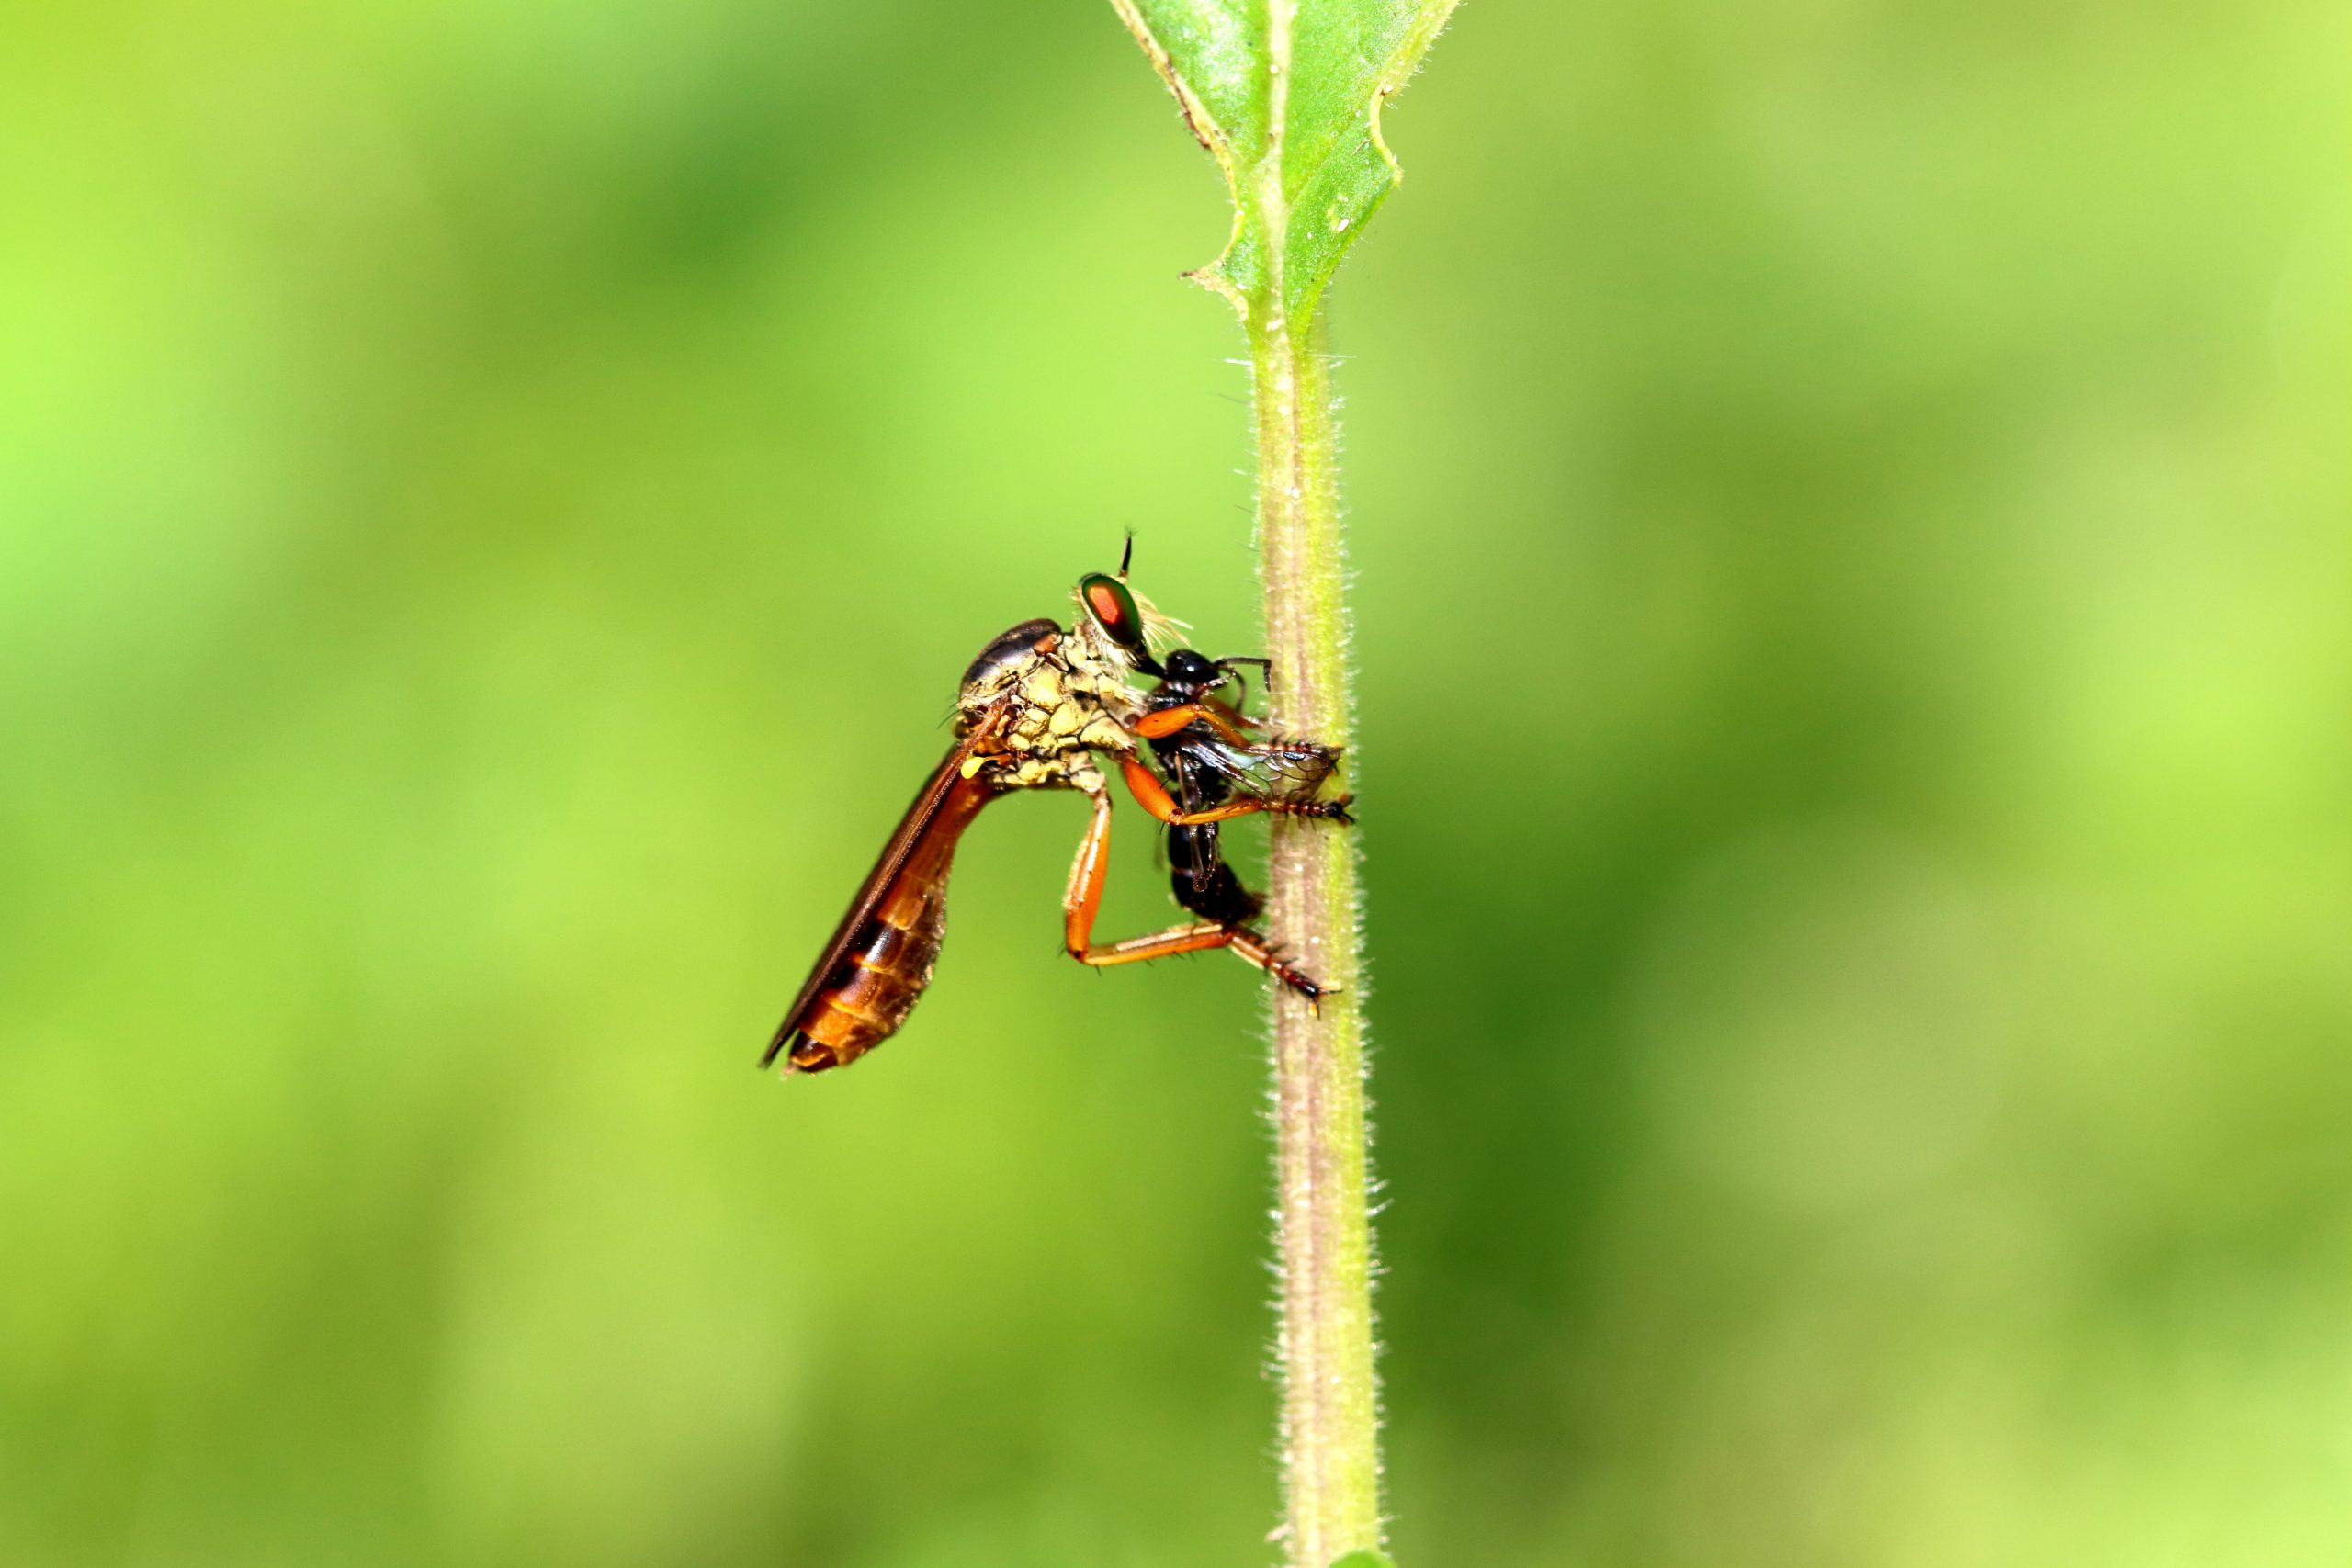 A robber fly on its prey